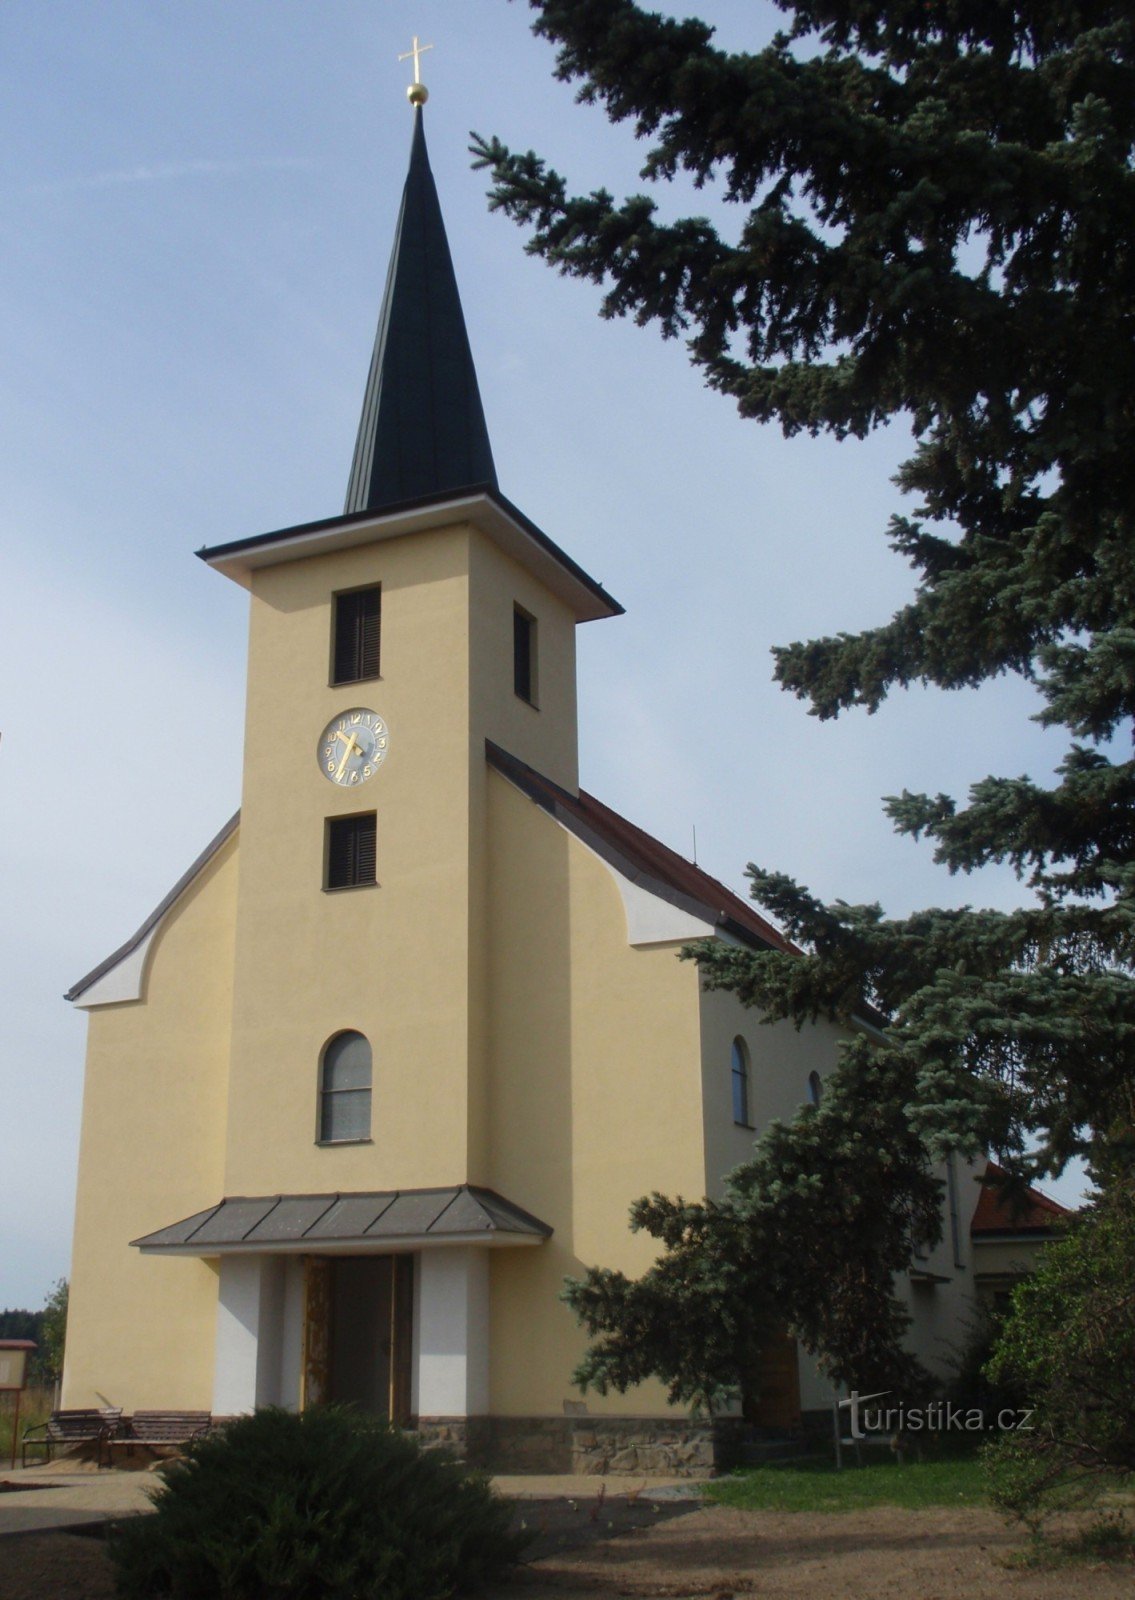 Monuments and attractions of Ruprechtov